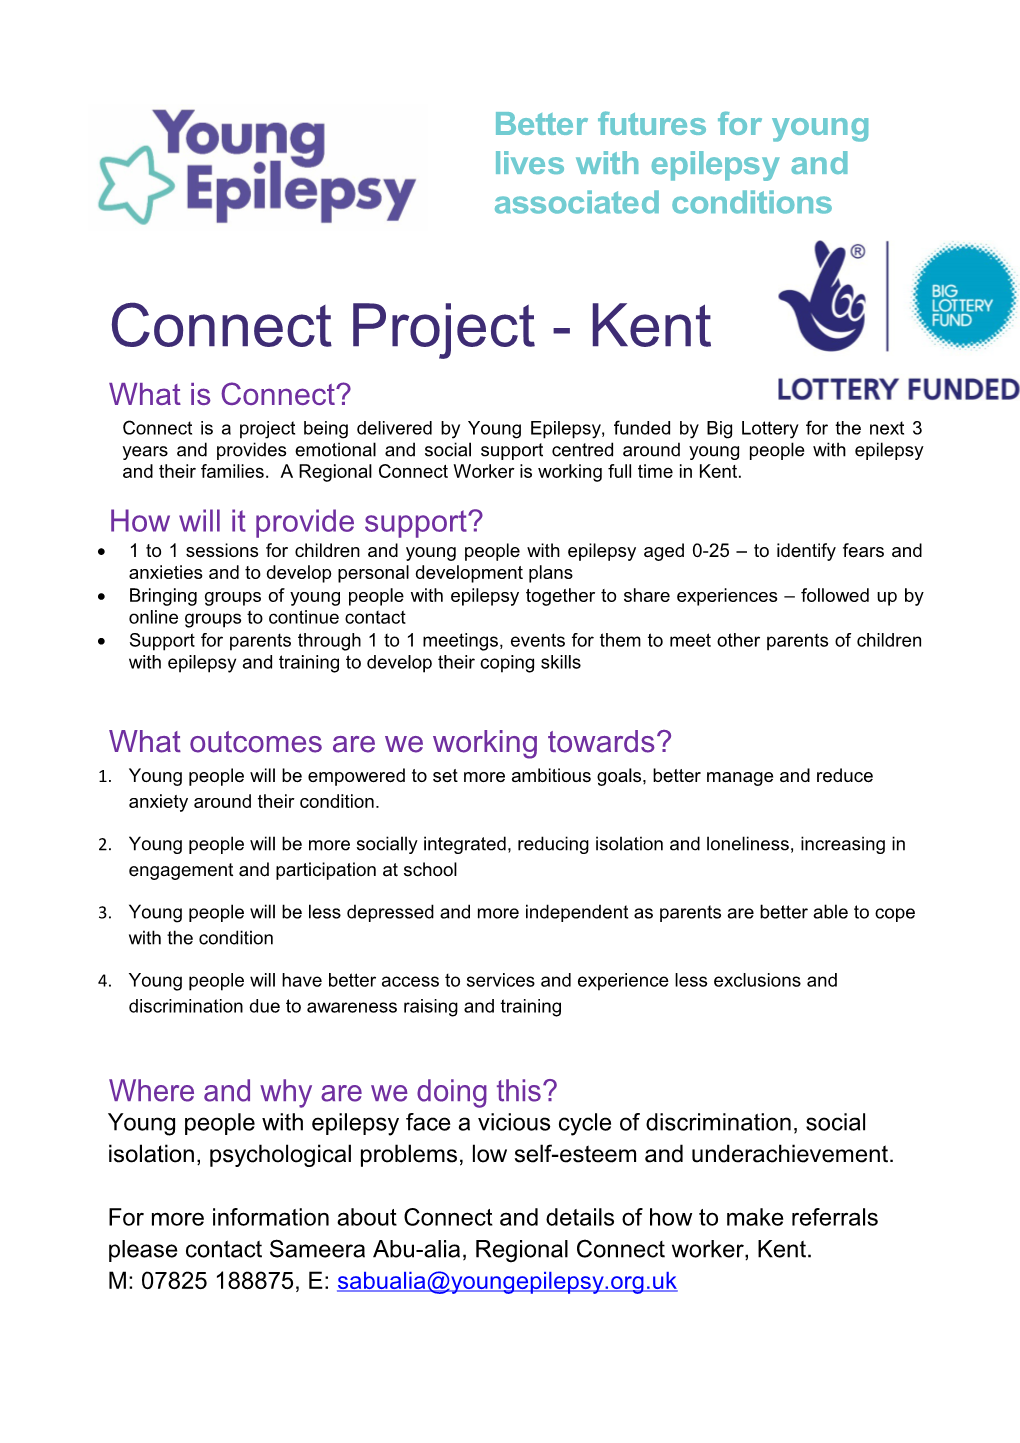 Connect Project - Kent